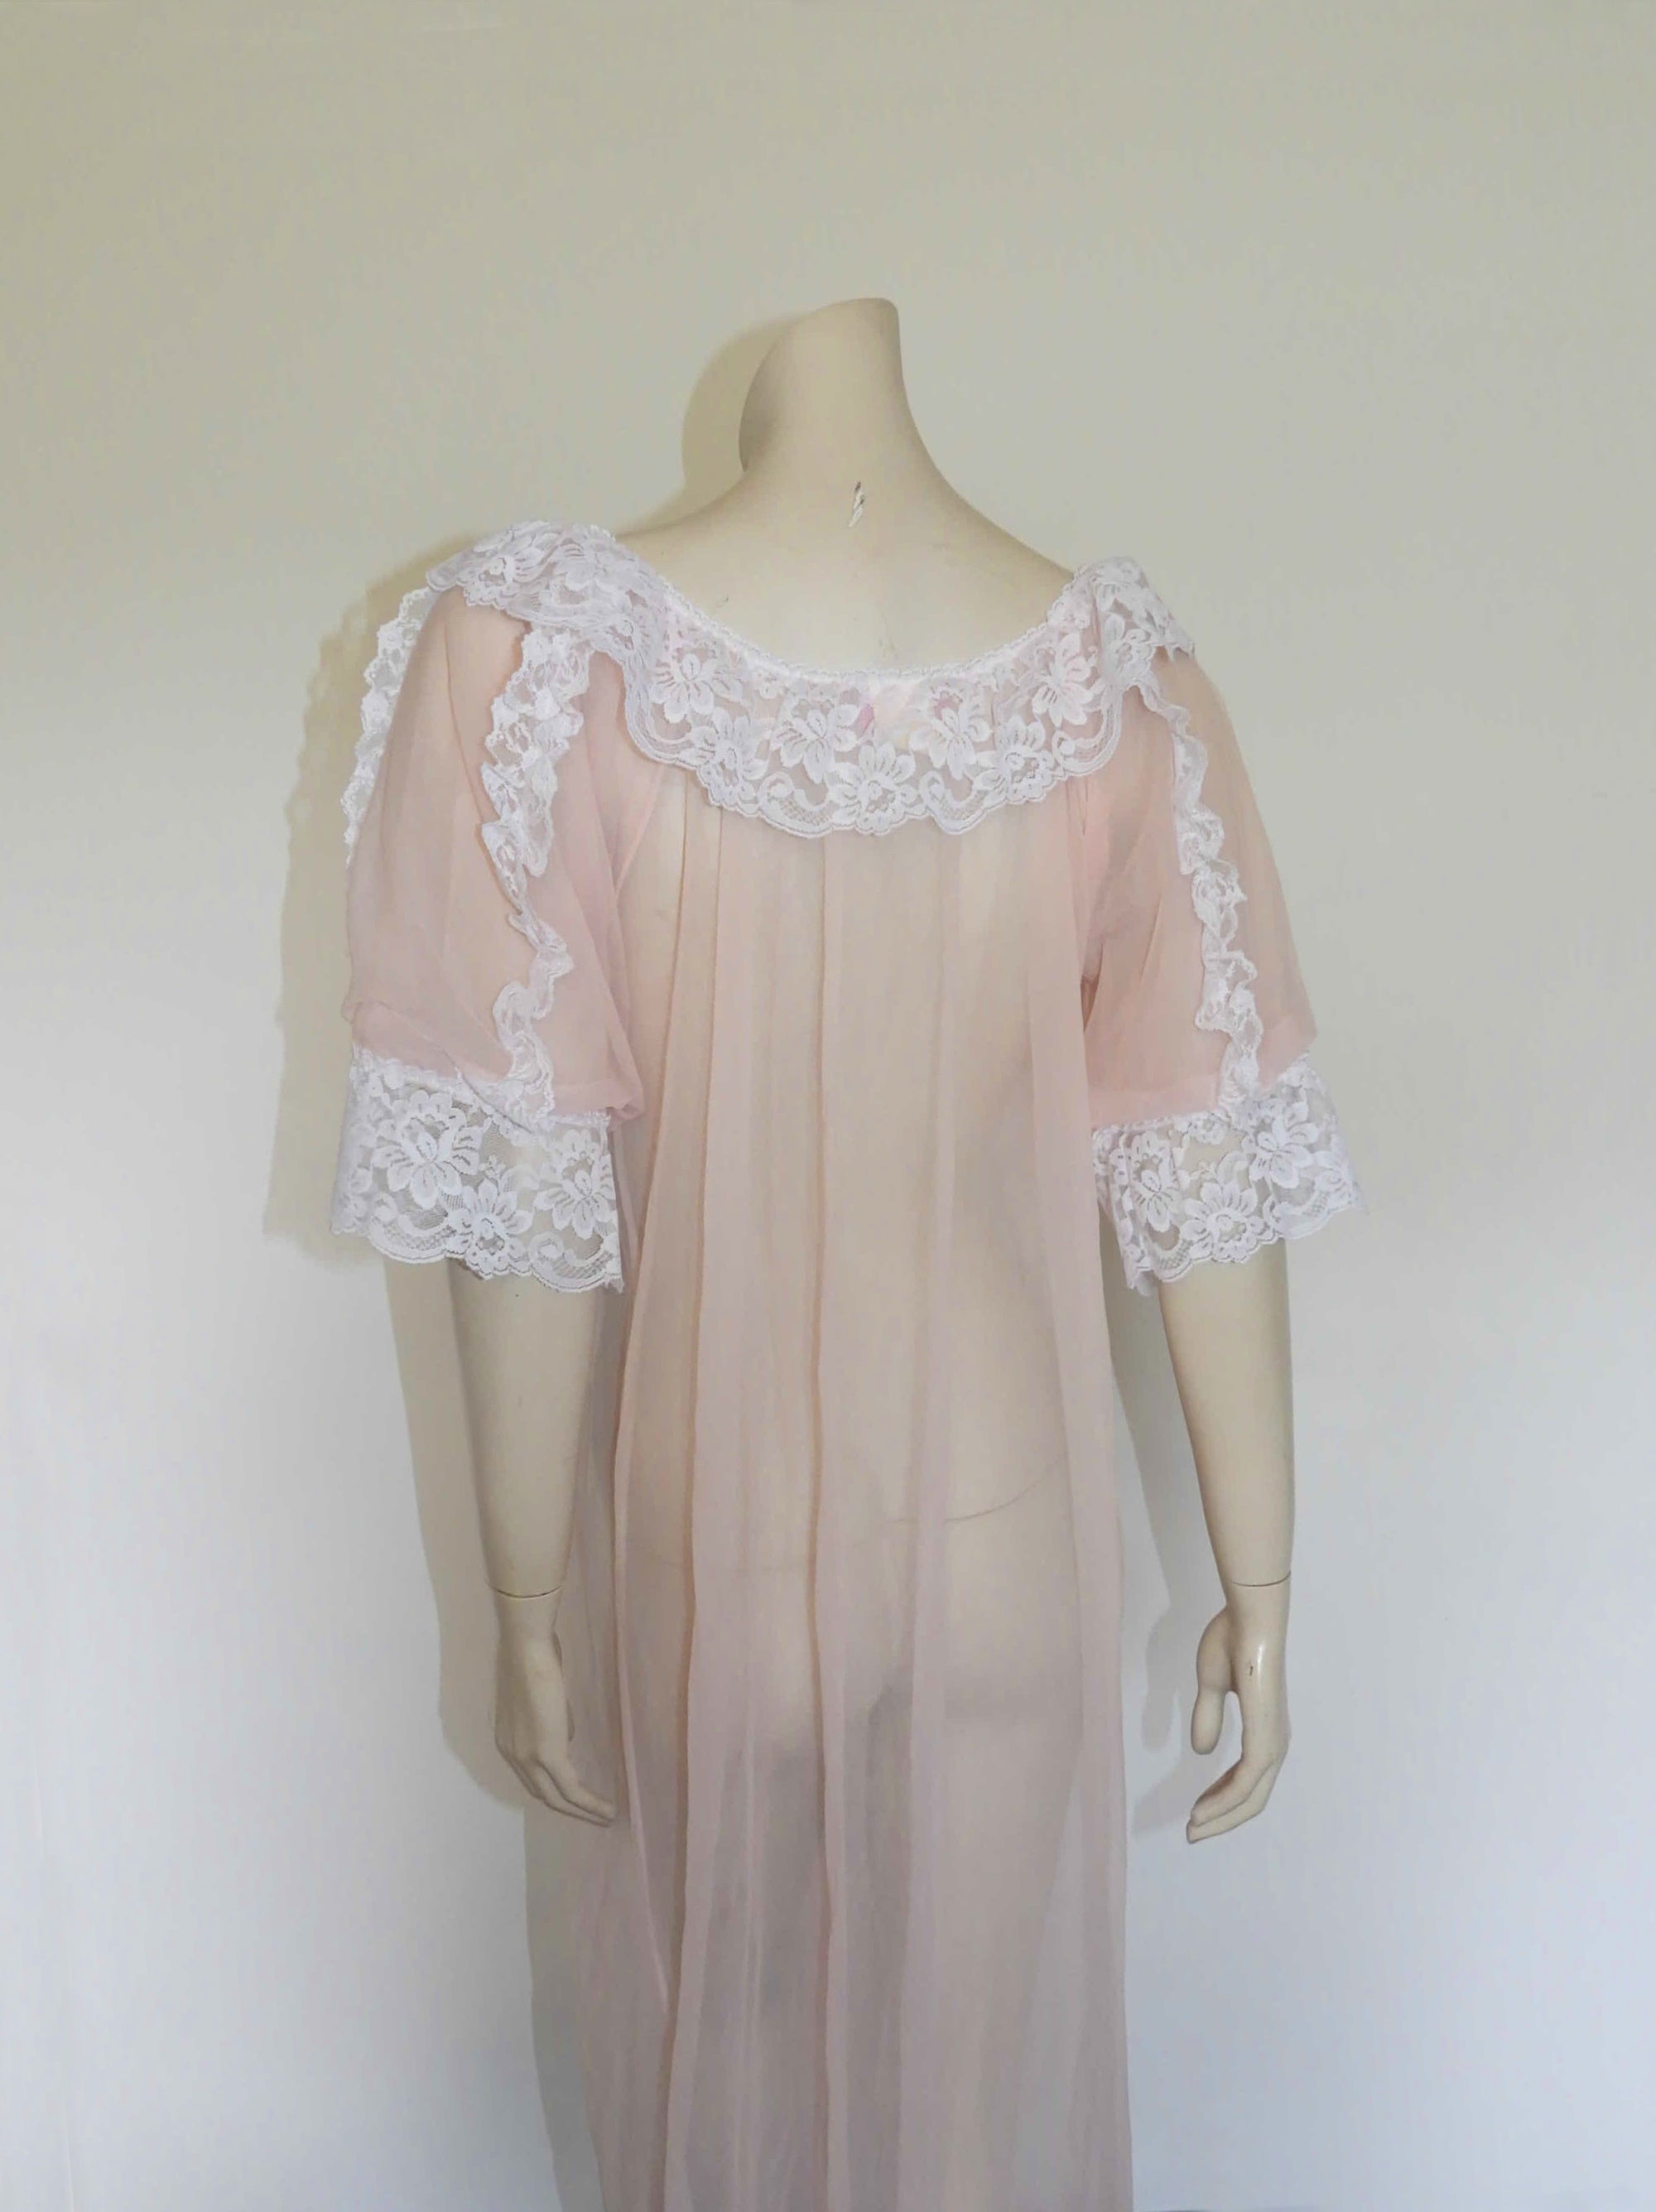 1990s vintage sheer pink peignoir robe with white lace by la loire medium